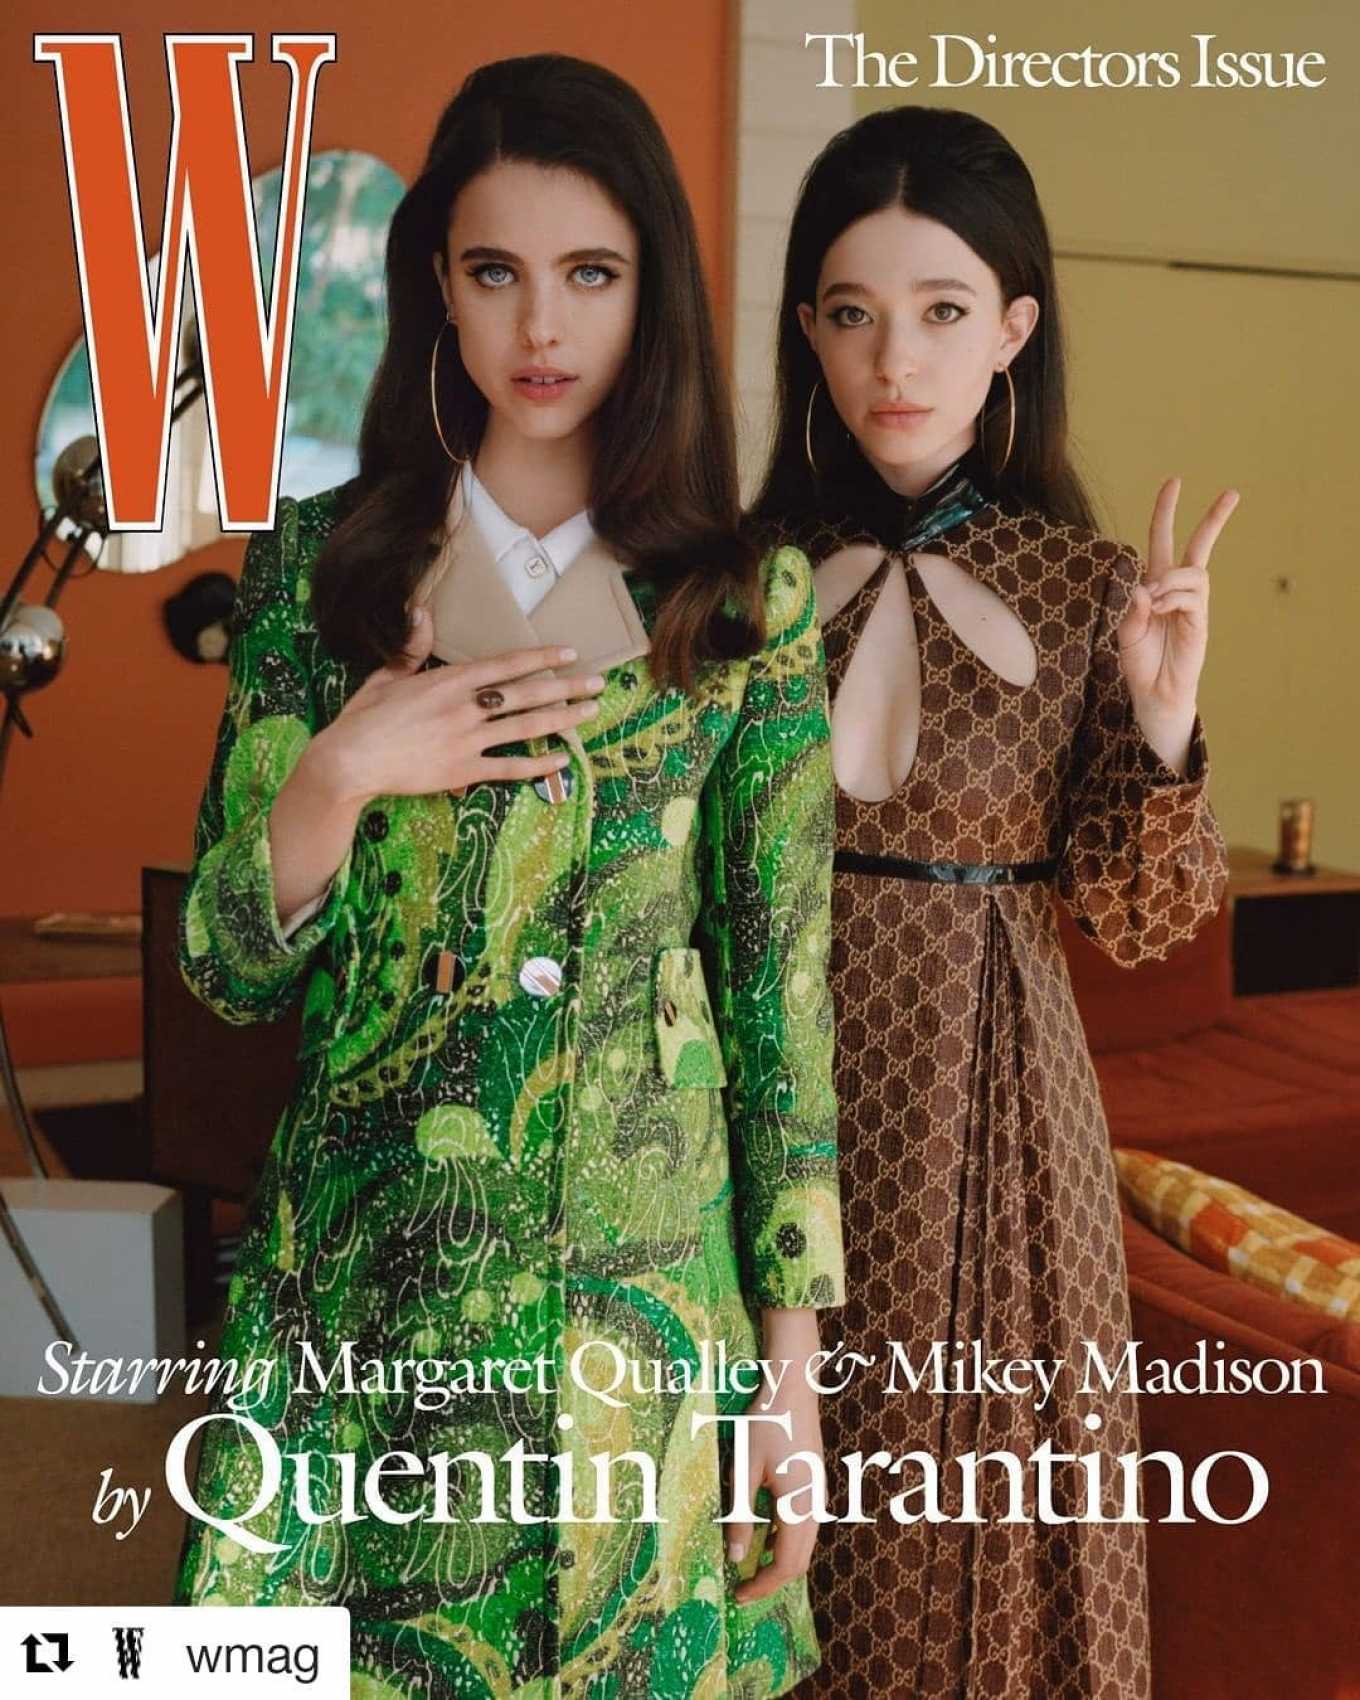 Margaret Qualley and Mikey Madison - W Magazine Volume #2 2020 The Directors Issue